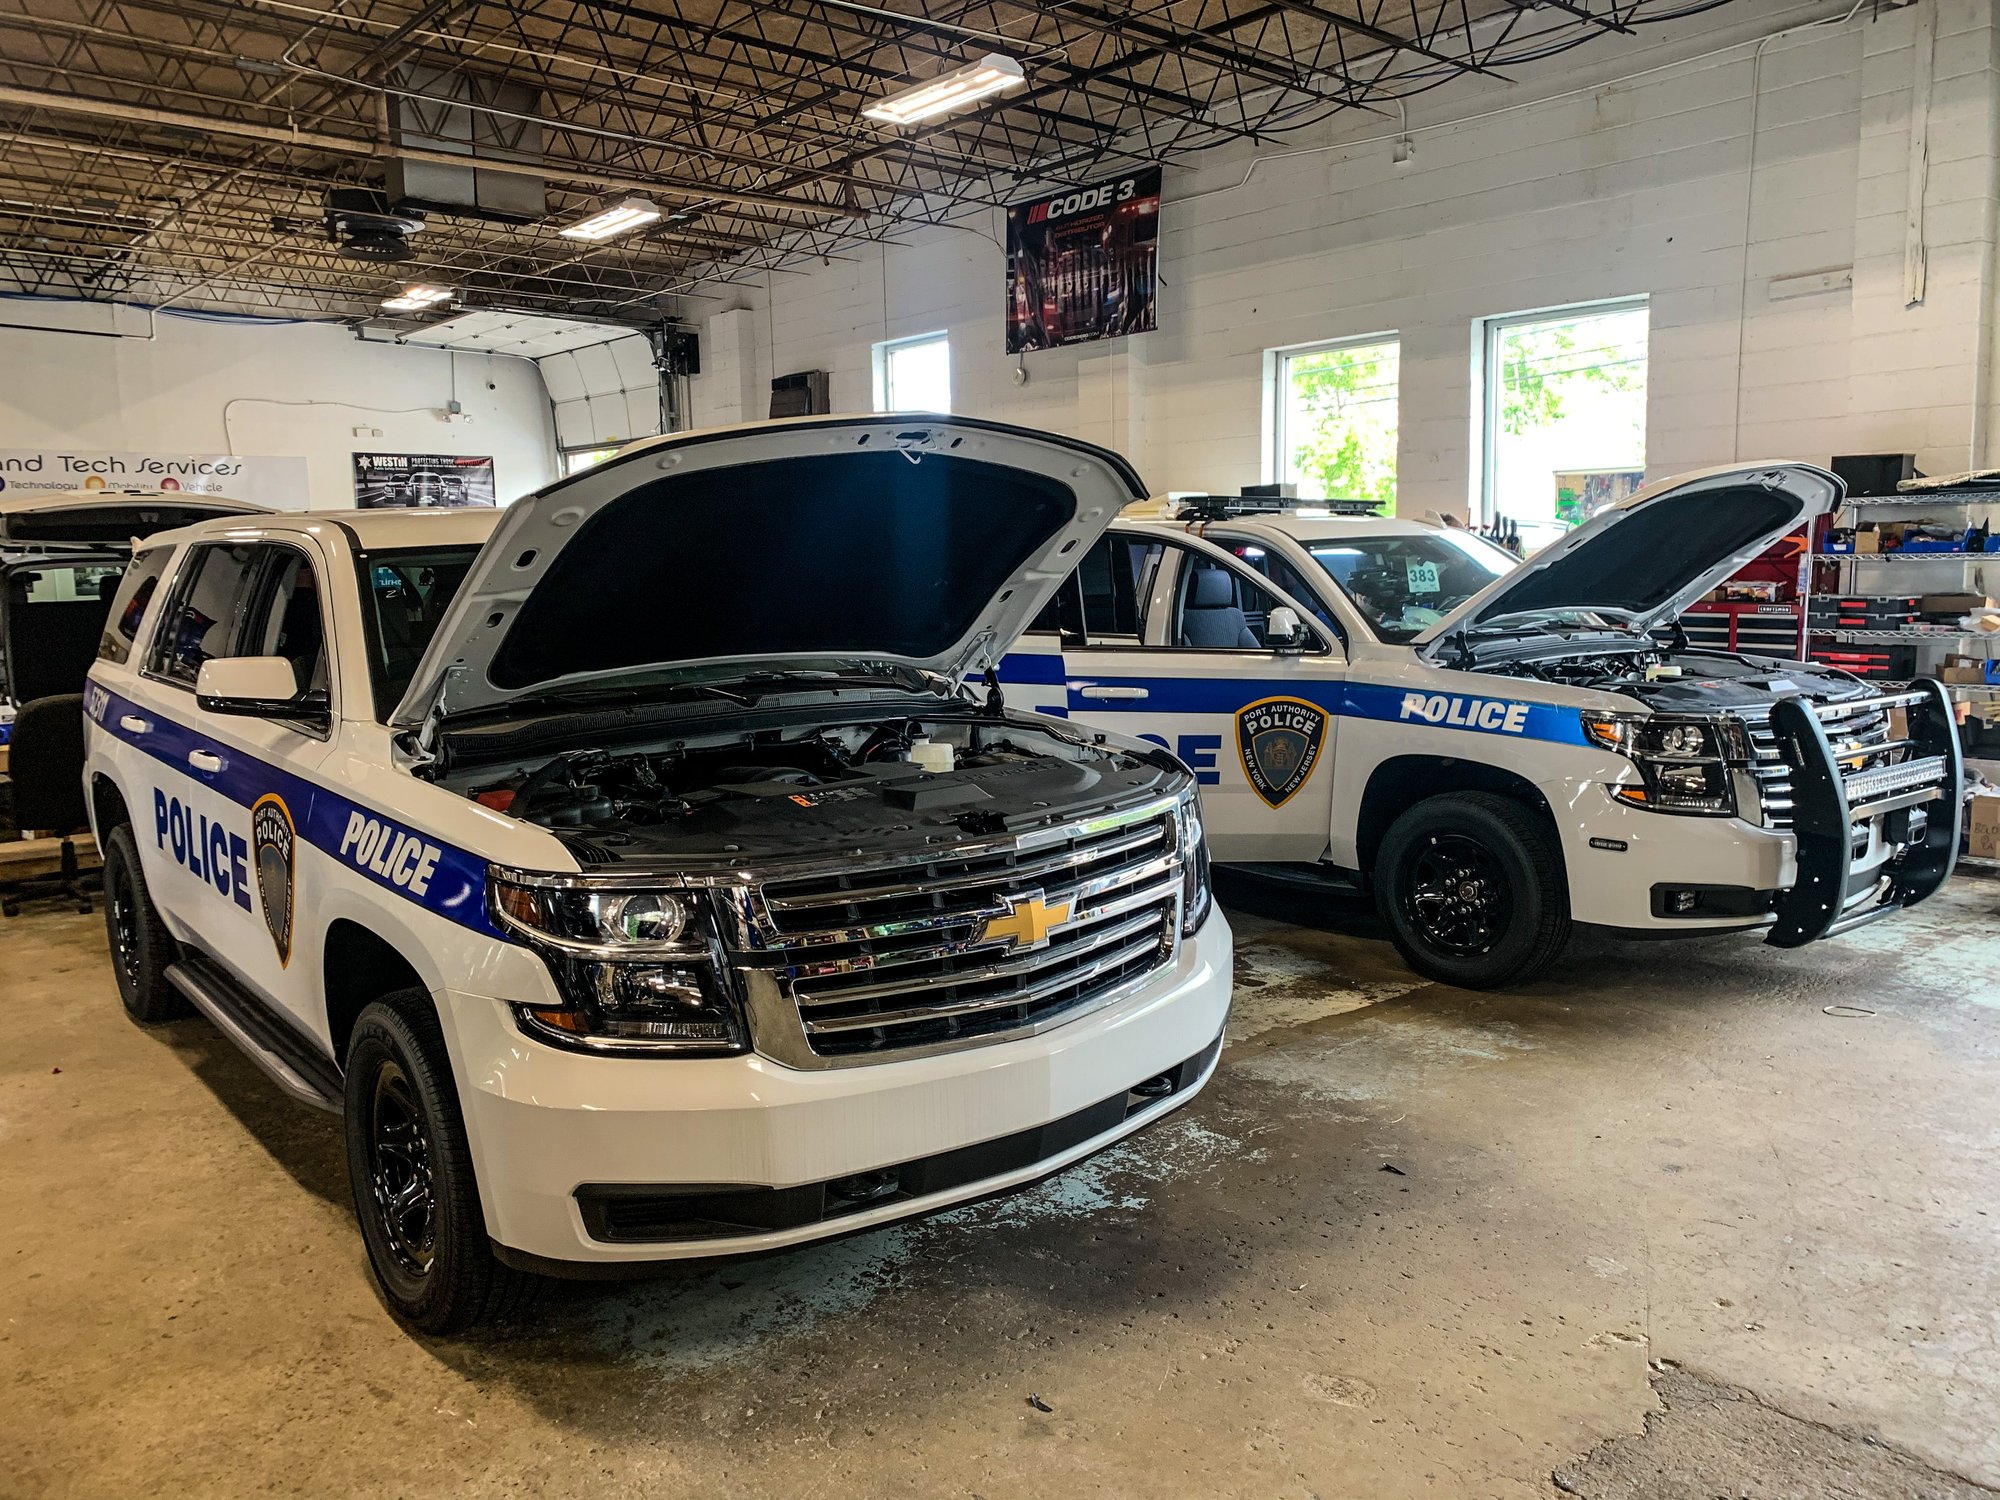 police vehicles in auto shop